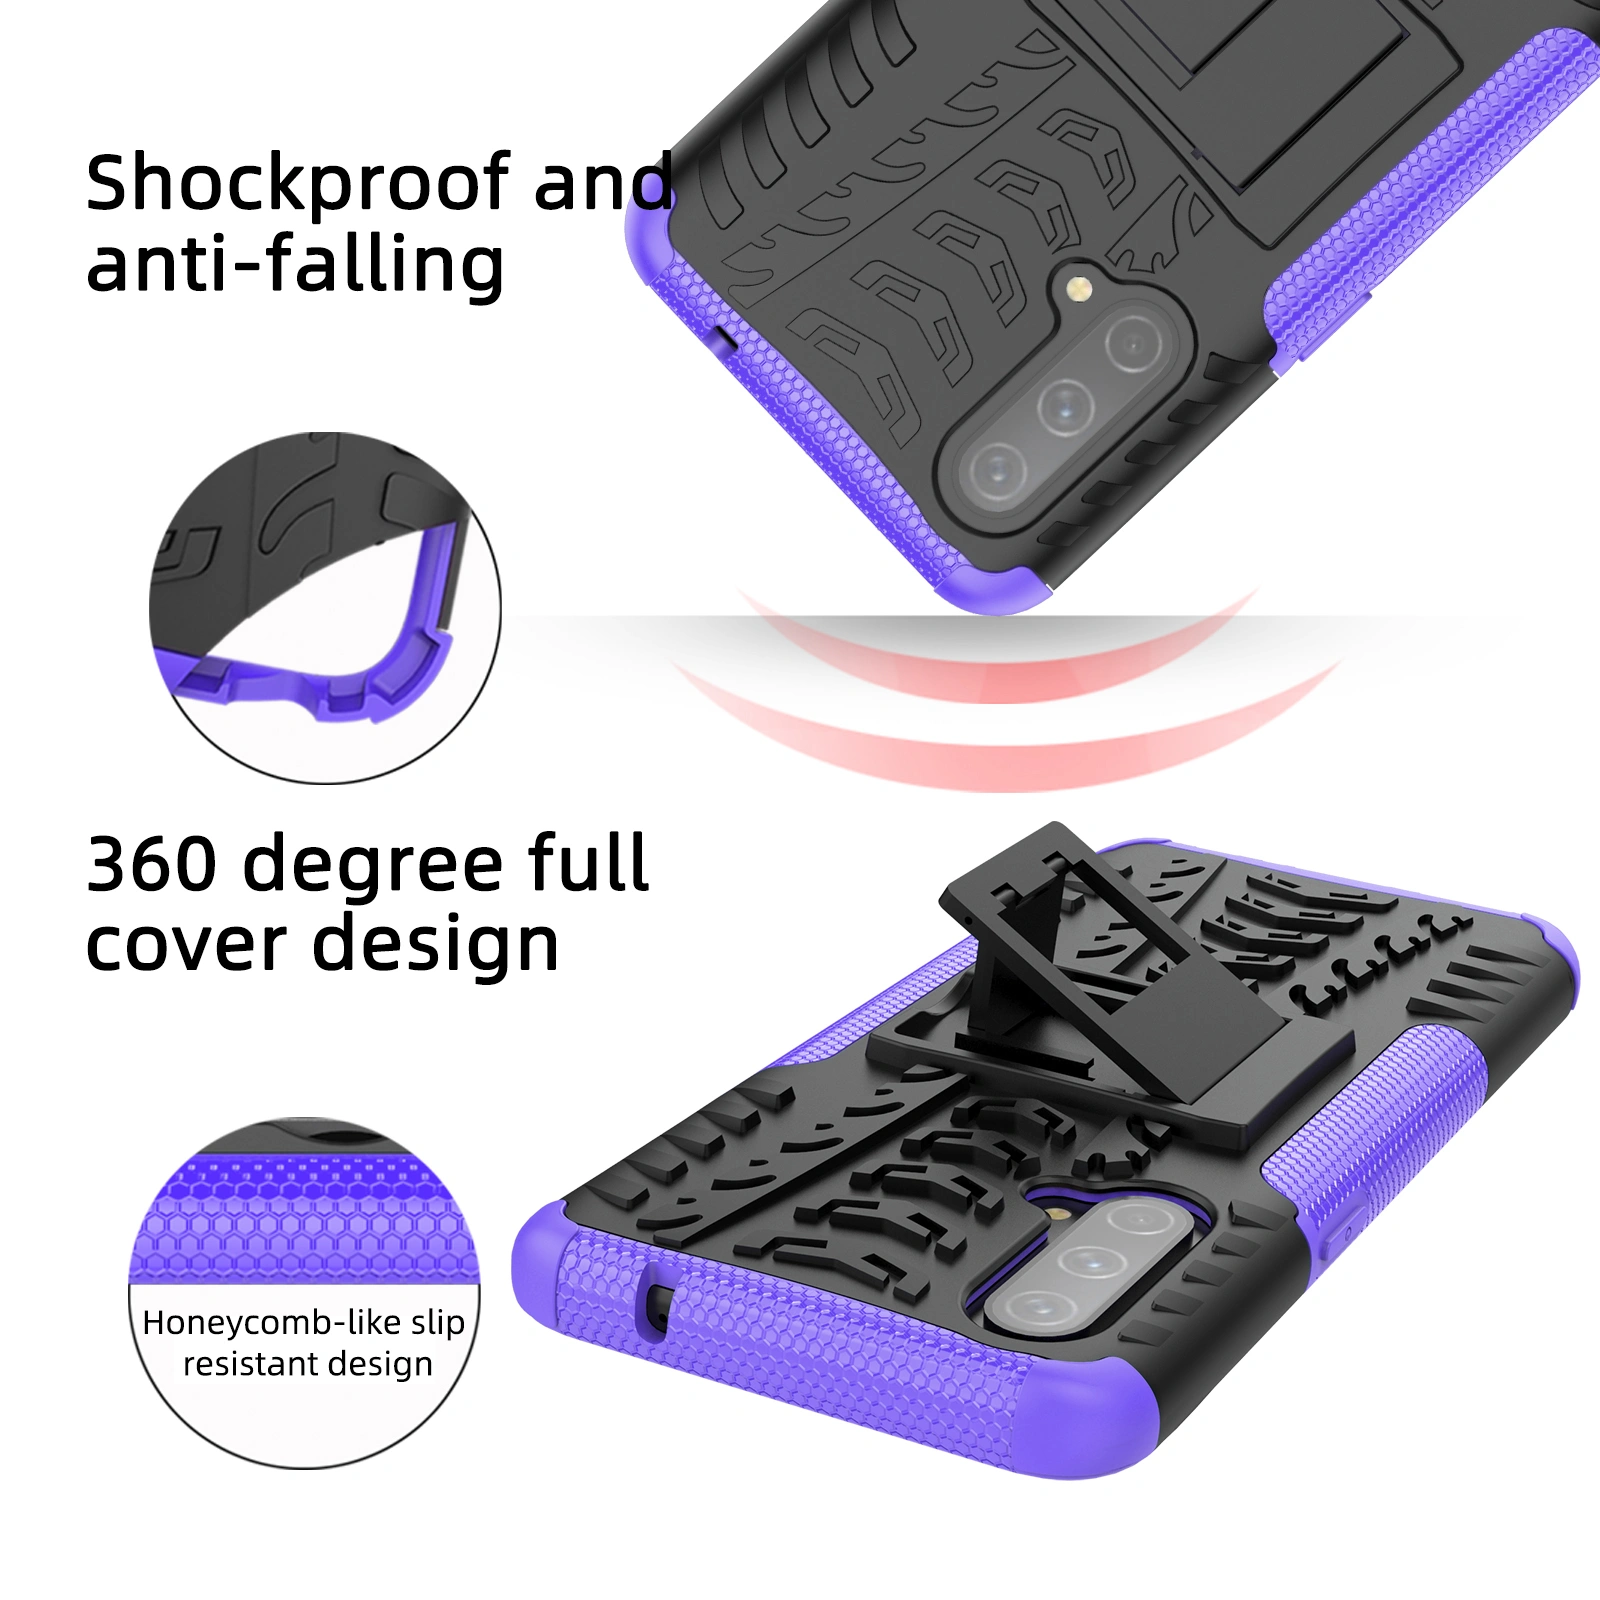 shockproof and anti-falling,360 degree full cover design